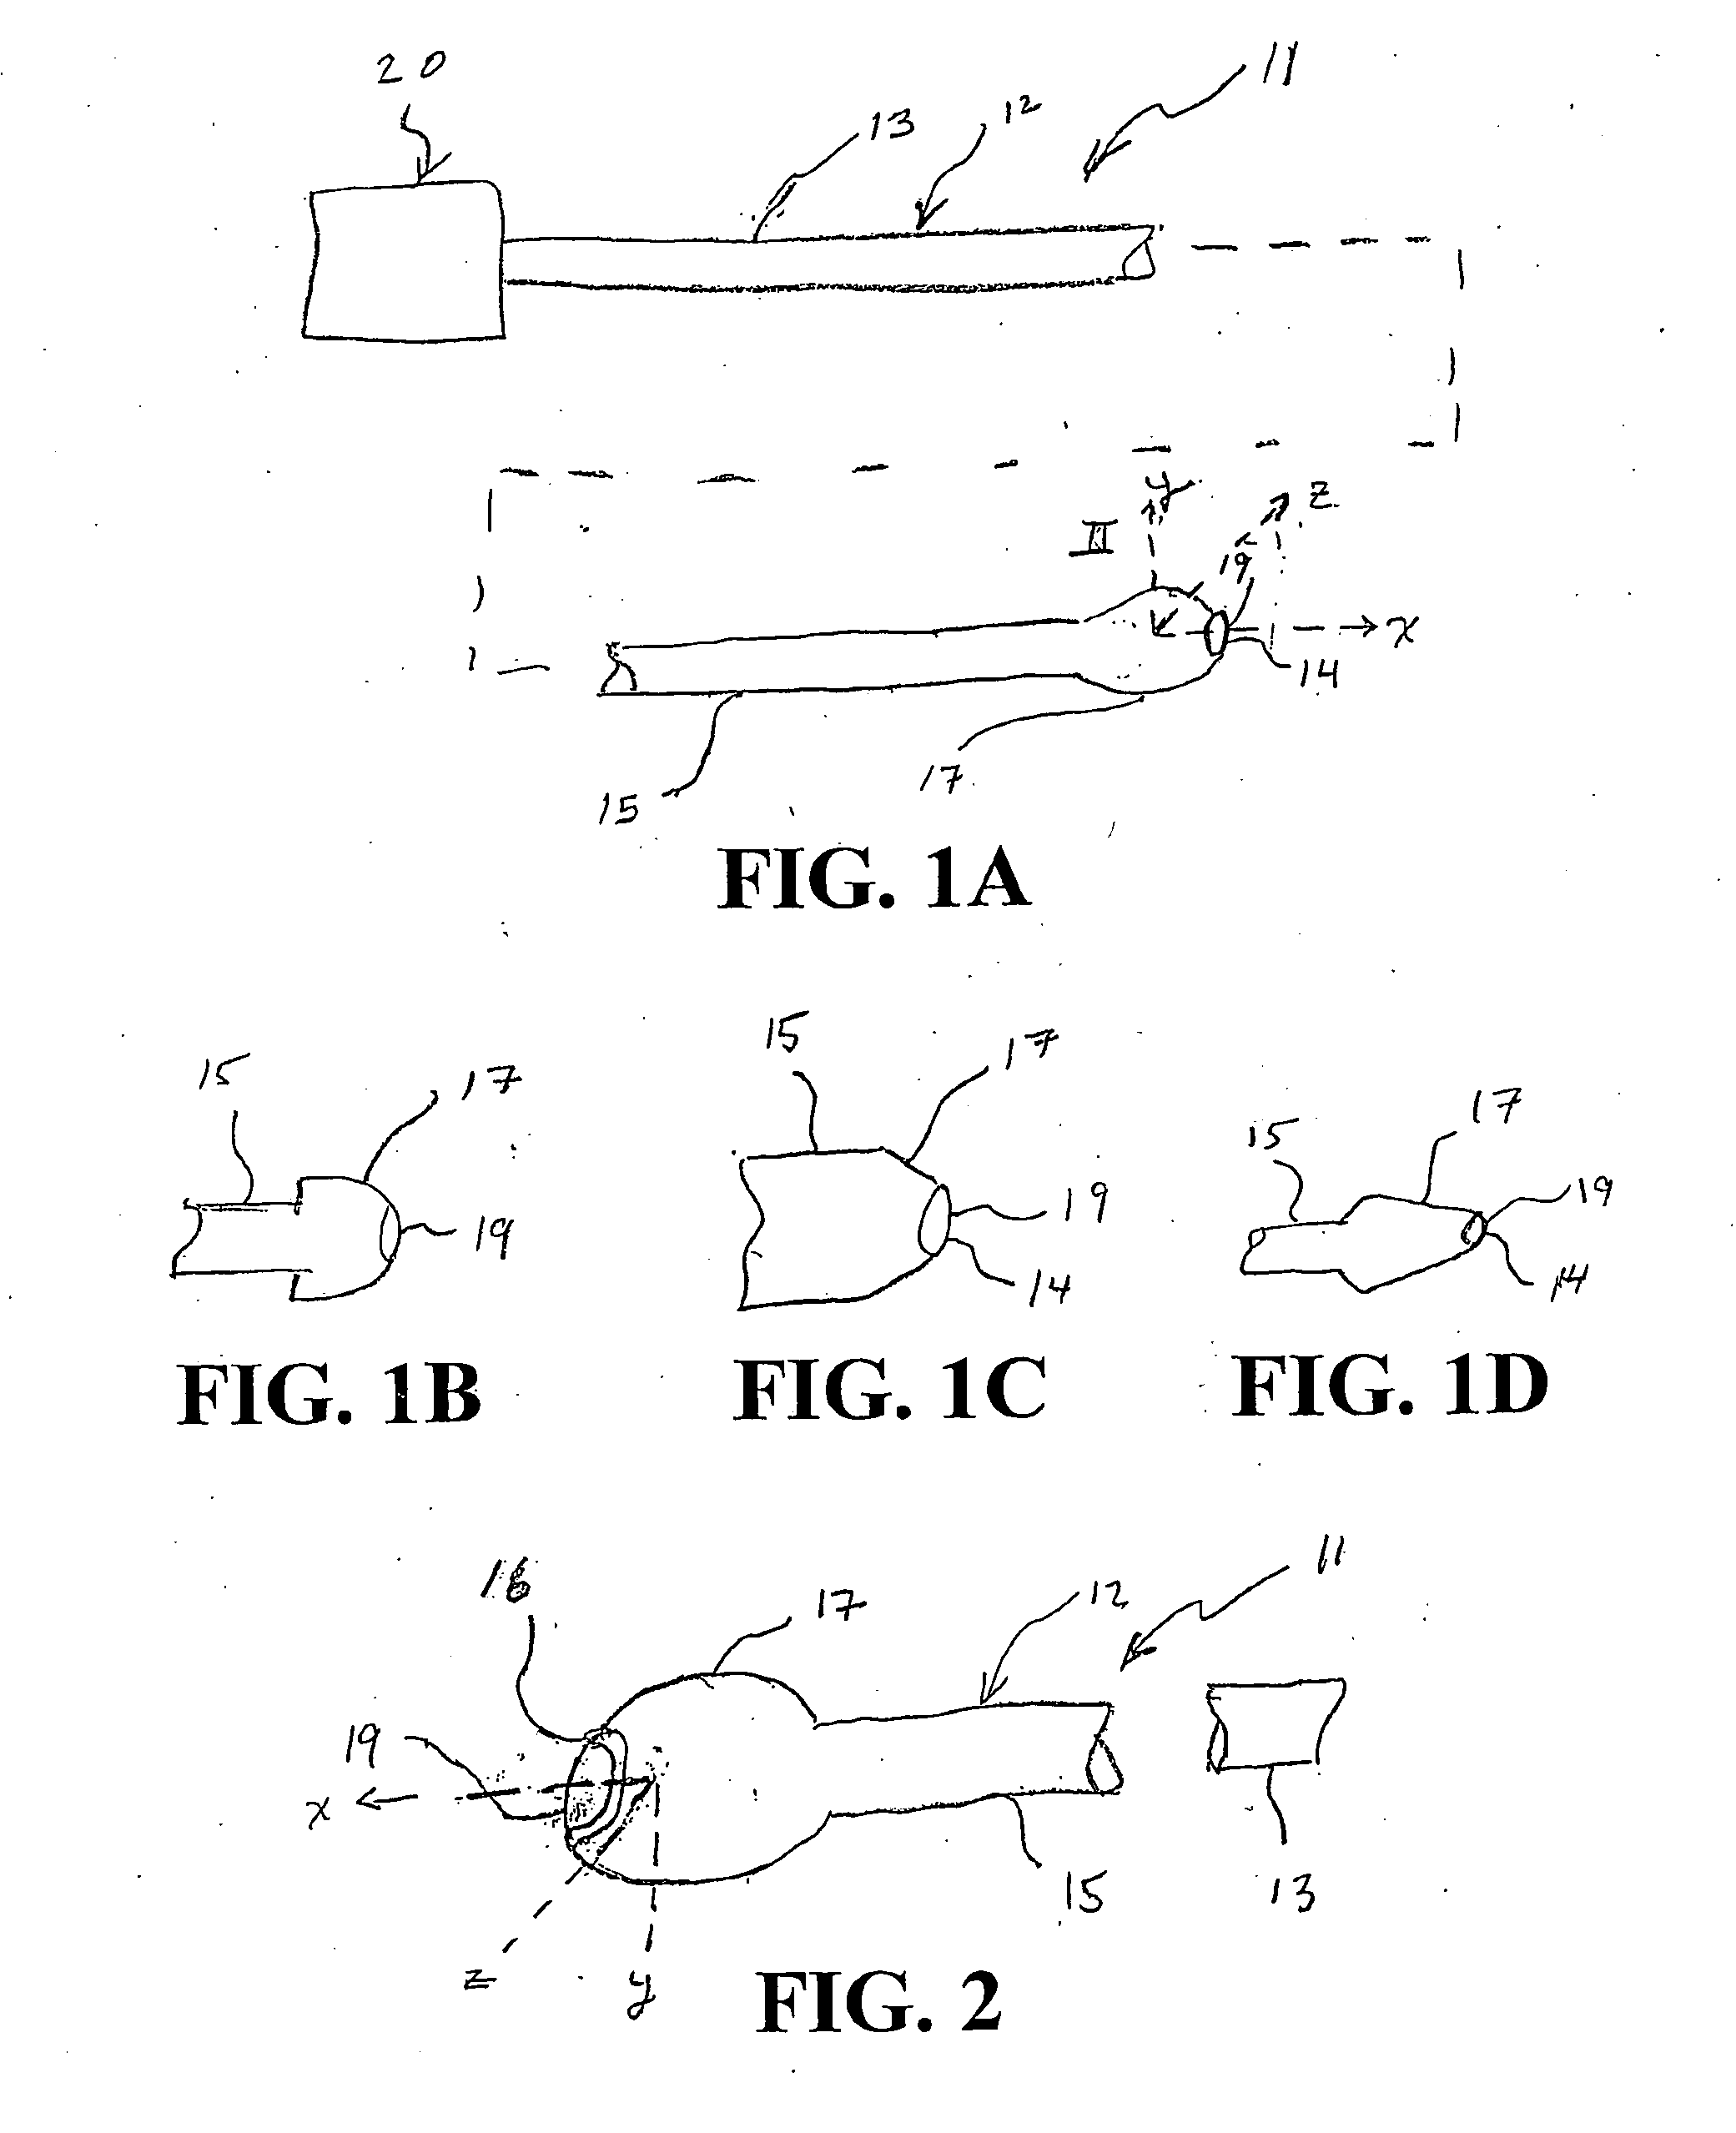 Vascular Catheter Device and Related Methods of Using the Same